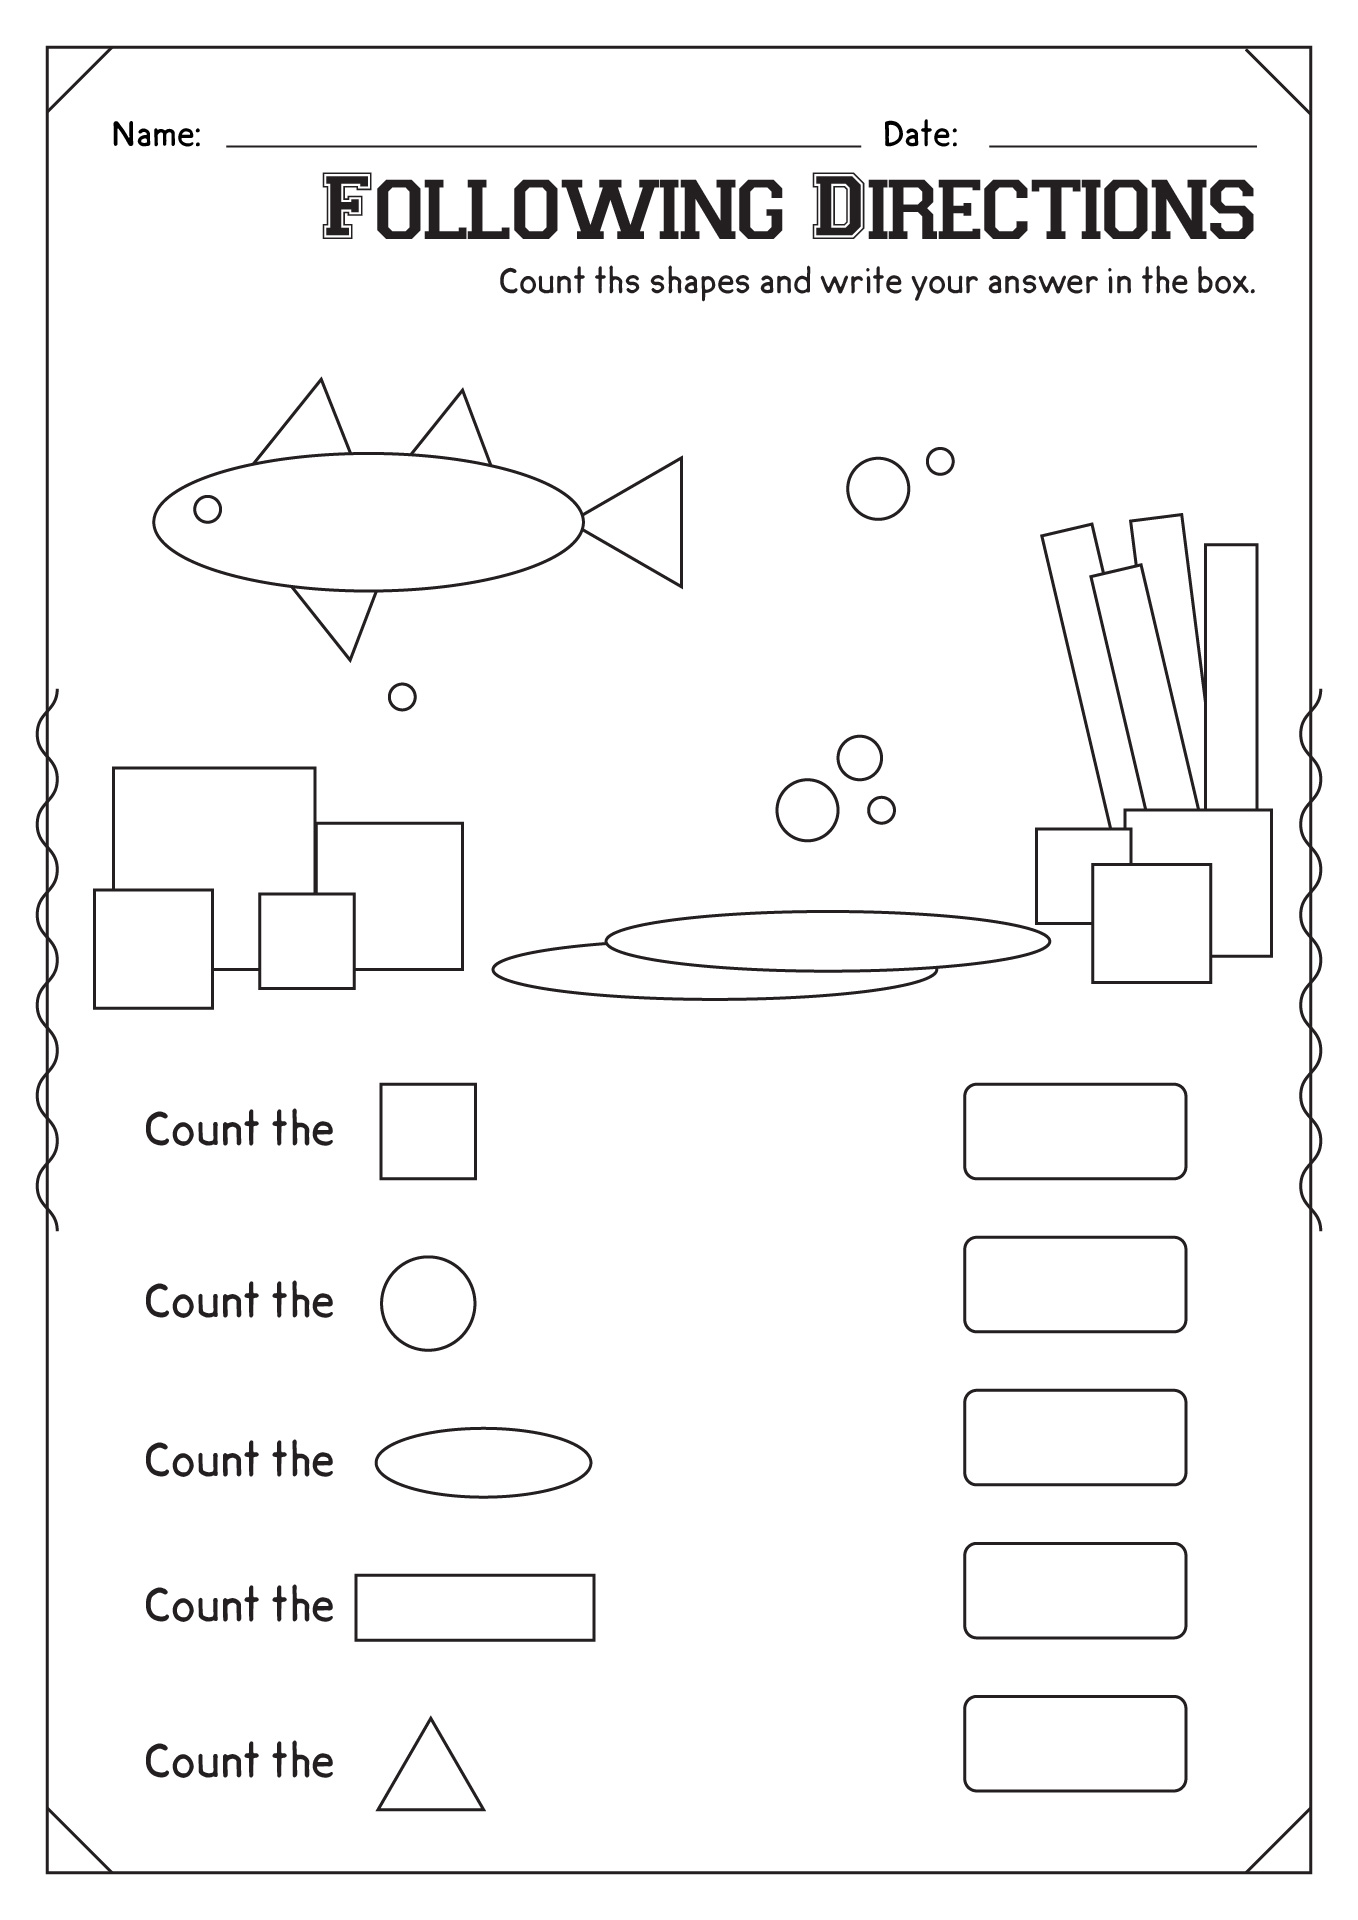 Following Directions Worksheets Shapes Image